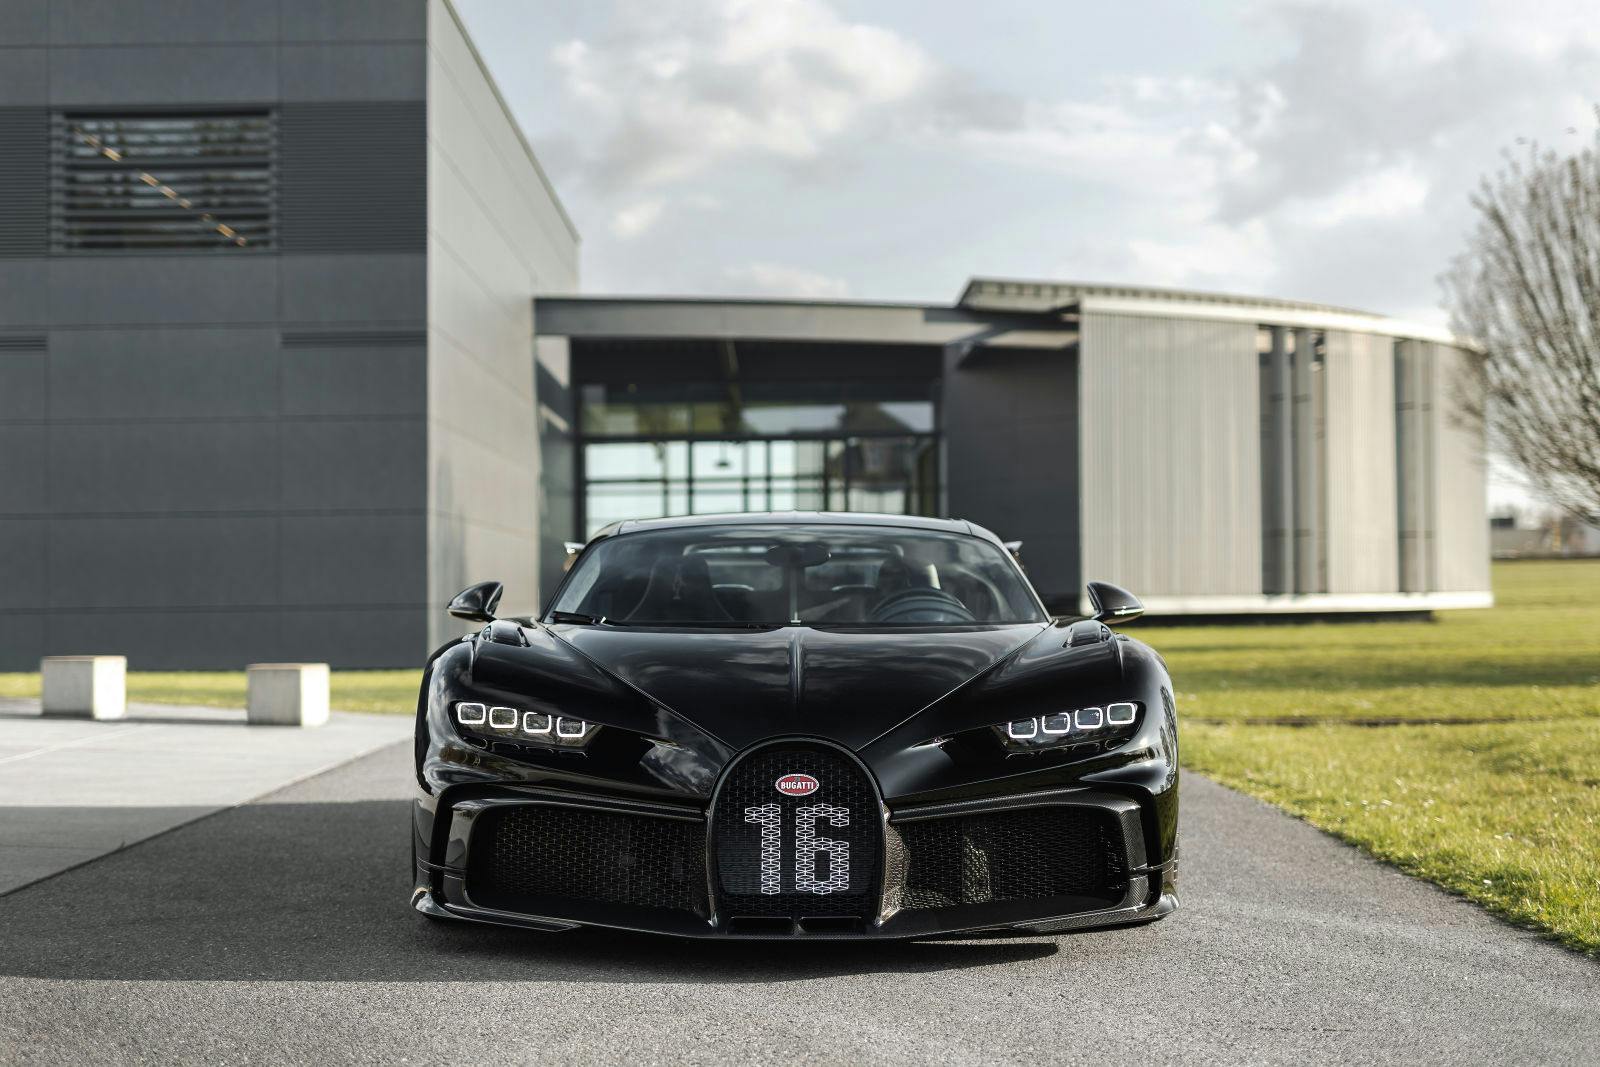 The 300th Chiron, a Bugatti Chiron Pur Sport, leaves the Atelier in Molsheim.